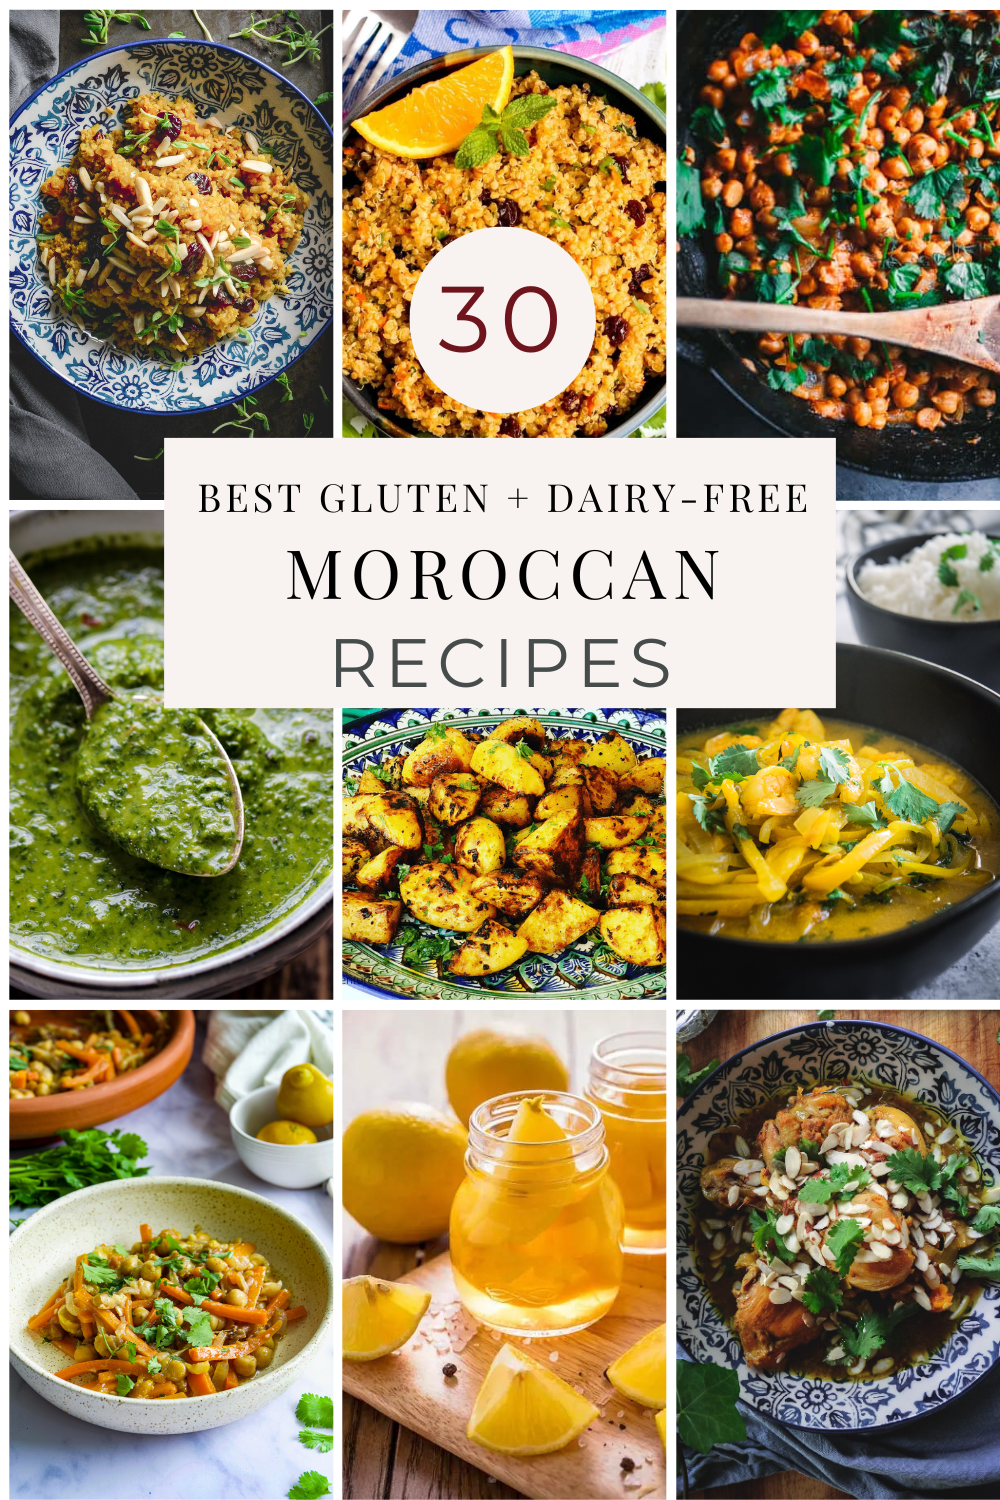 a compilation of 12 smaller images of various Moroccan recipes with text overlay